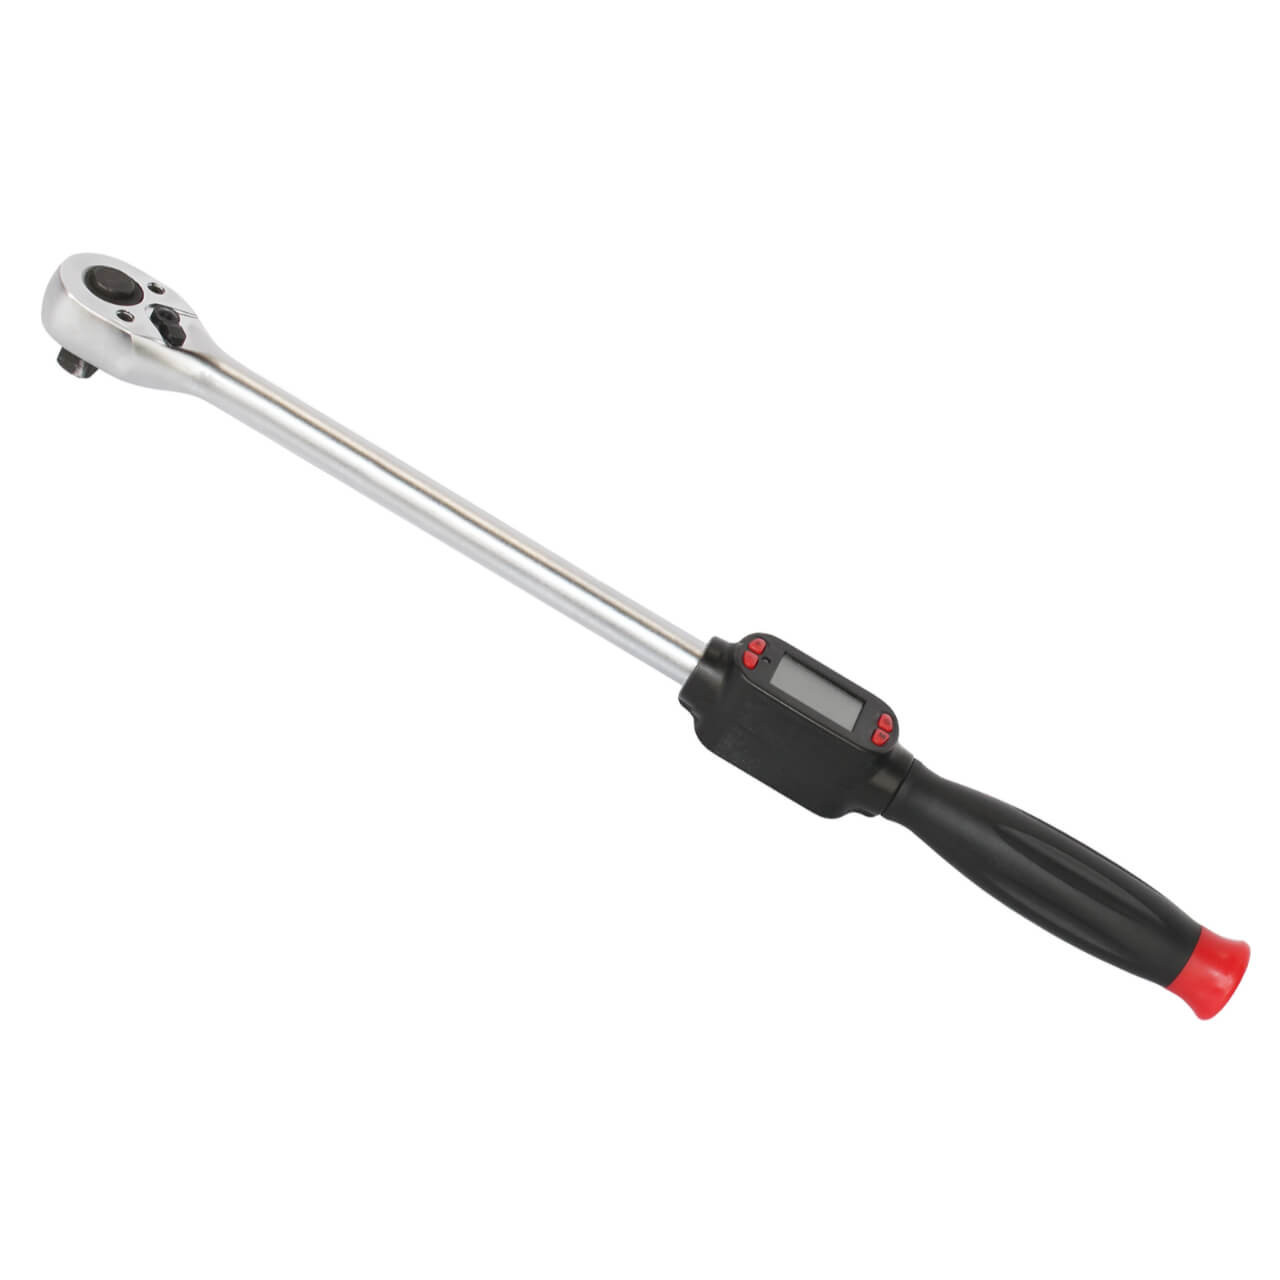 888 Tools 1/2 Dr 40-200nm Drive Digital Torque Wrench